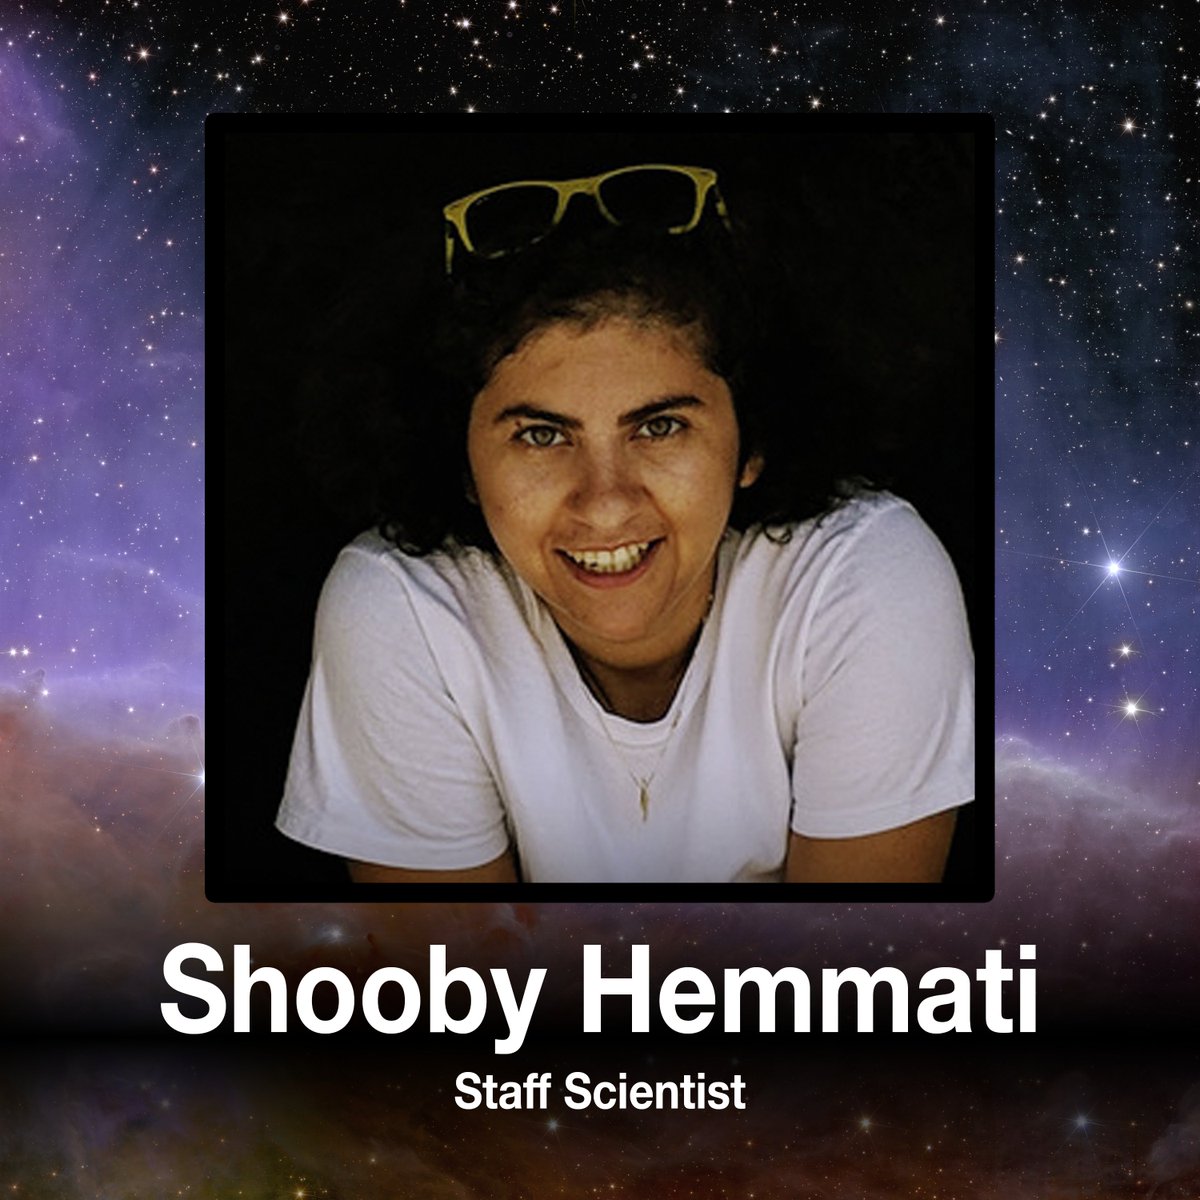 For #WomensHistoryMonth, we're highlighting some recent 'Meet the Staff' articles about women who work at IPAC. 'I would be more than thrilled if AI played a part in finding or guiding us to these clues [about dark matter and dark energy],' said Shooby. ipac.caltech.edu/meet-the-staff…